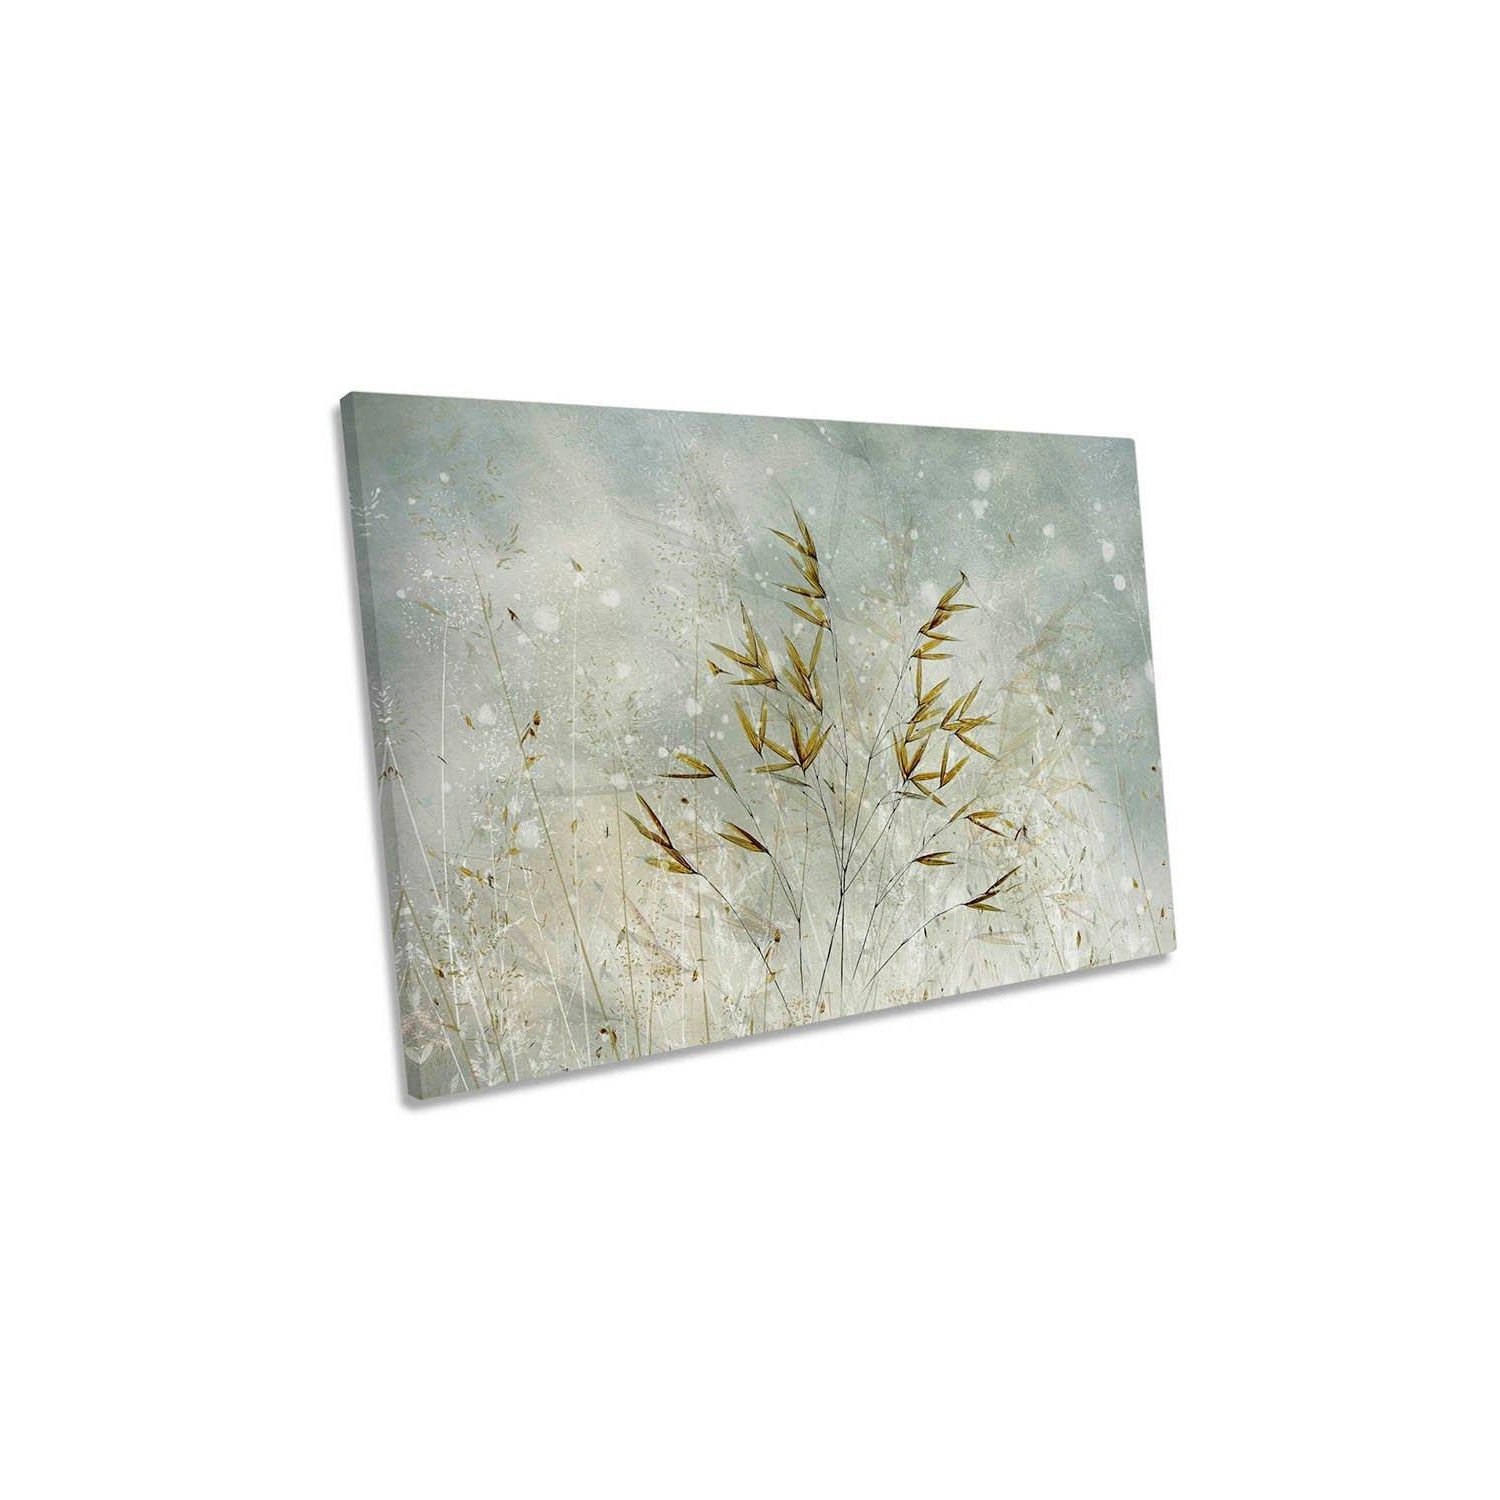 Wintertime Floral Grass Leaves Canvas Wall Art Picture Print - image 1